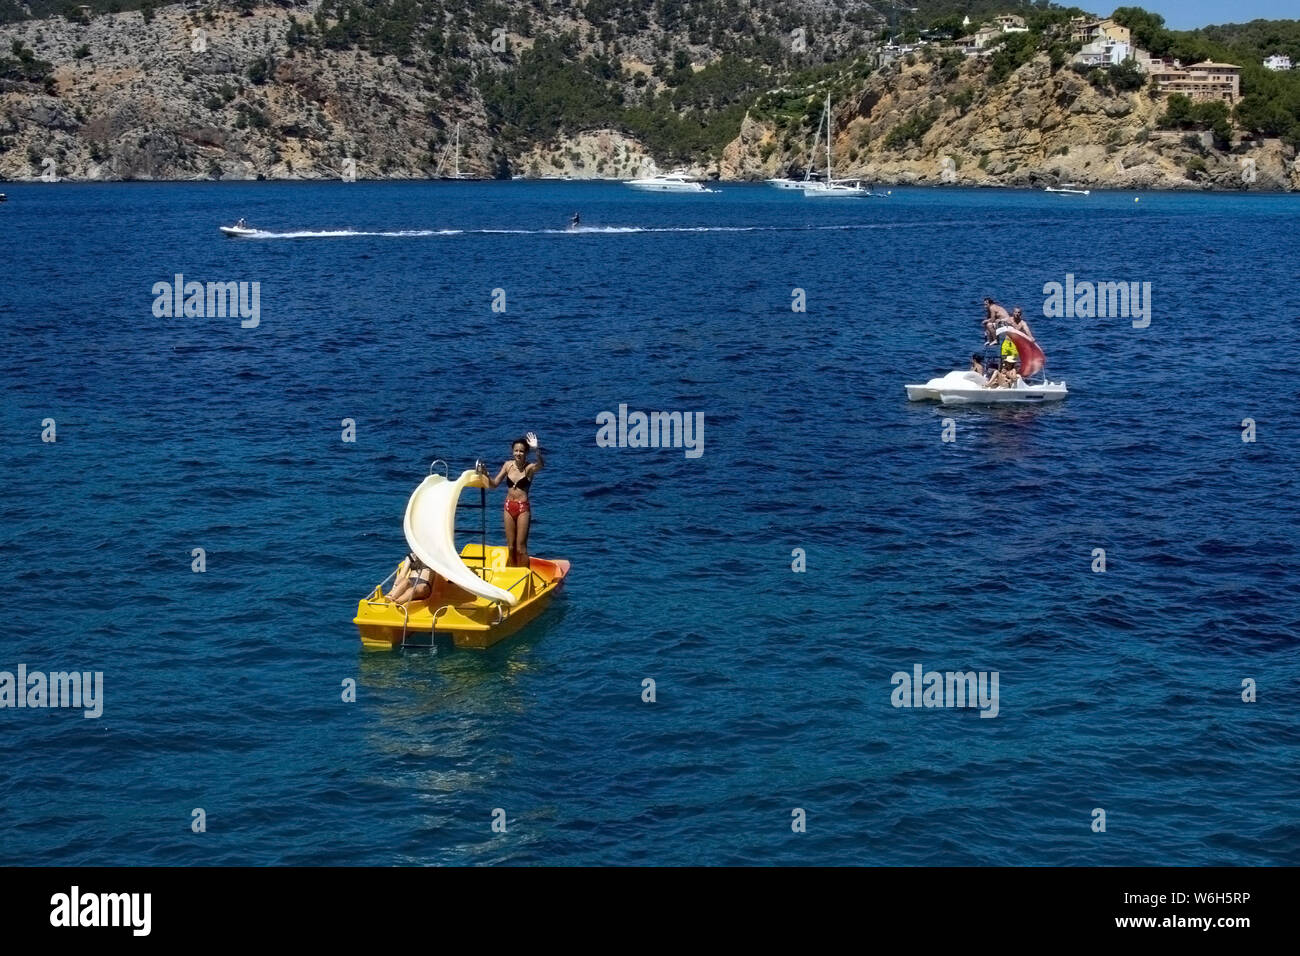 MALLORCA, SPAIN - JUNE 23, 2019: Girl on rented toy boat near coast on a sunny day on June 23, 2019 in Mallorca, Spain. Stock Photo